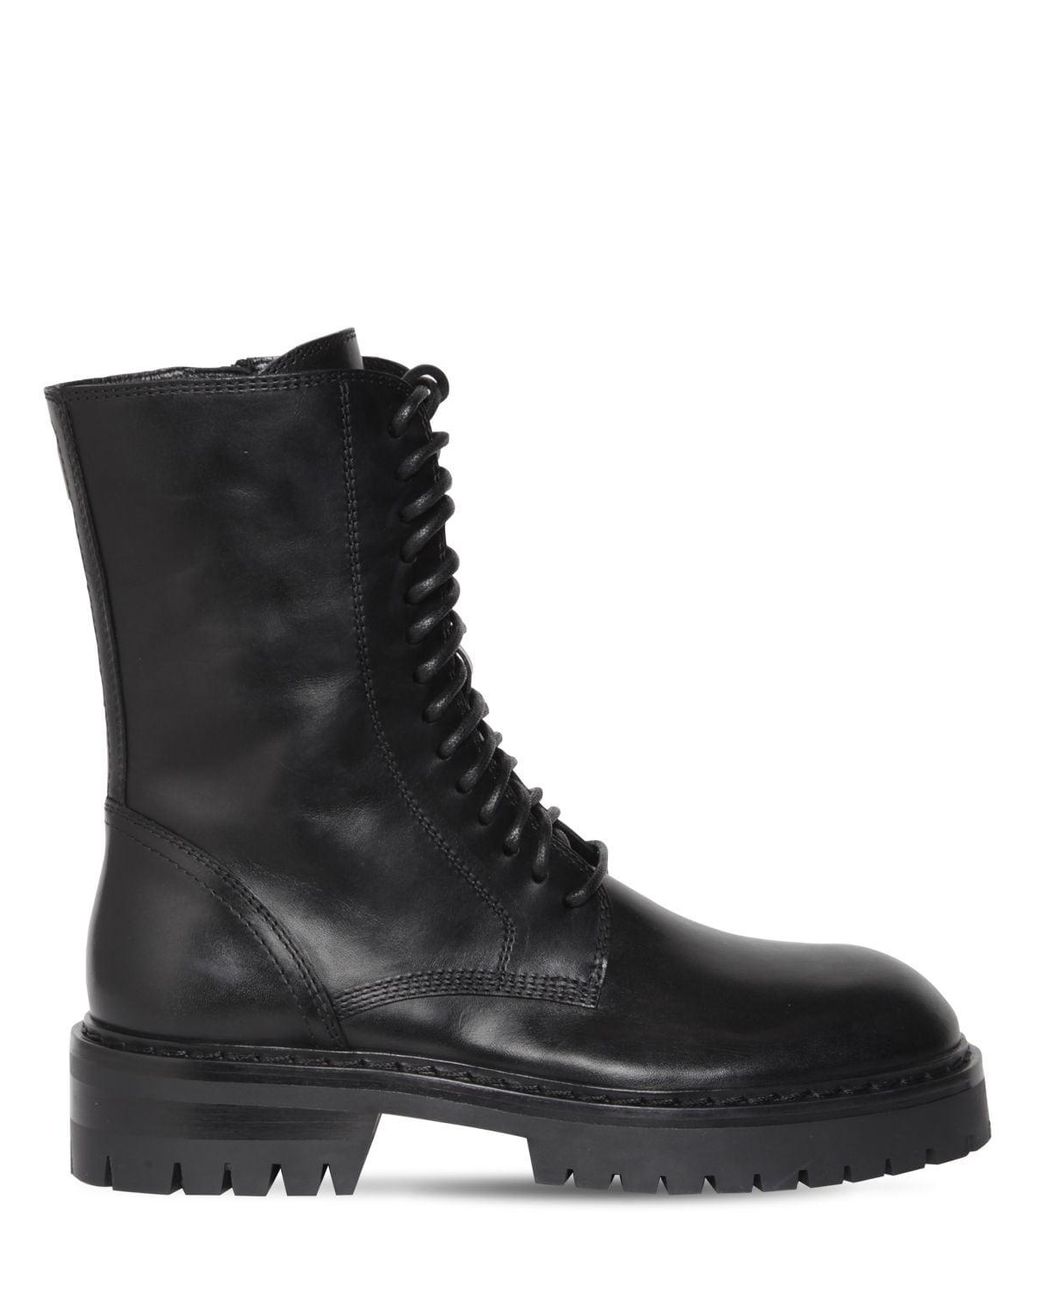 Ann Demeulemeester 35mm Alec Leather Combat Boots in Black | Lyst